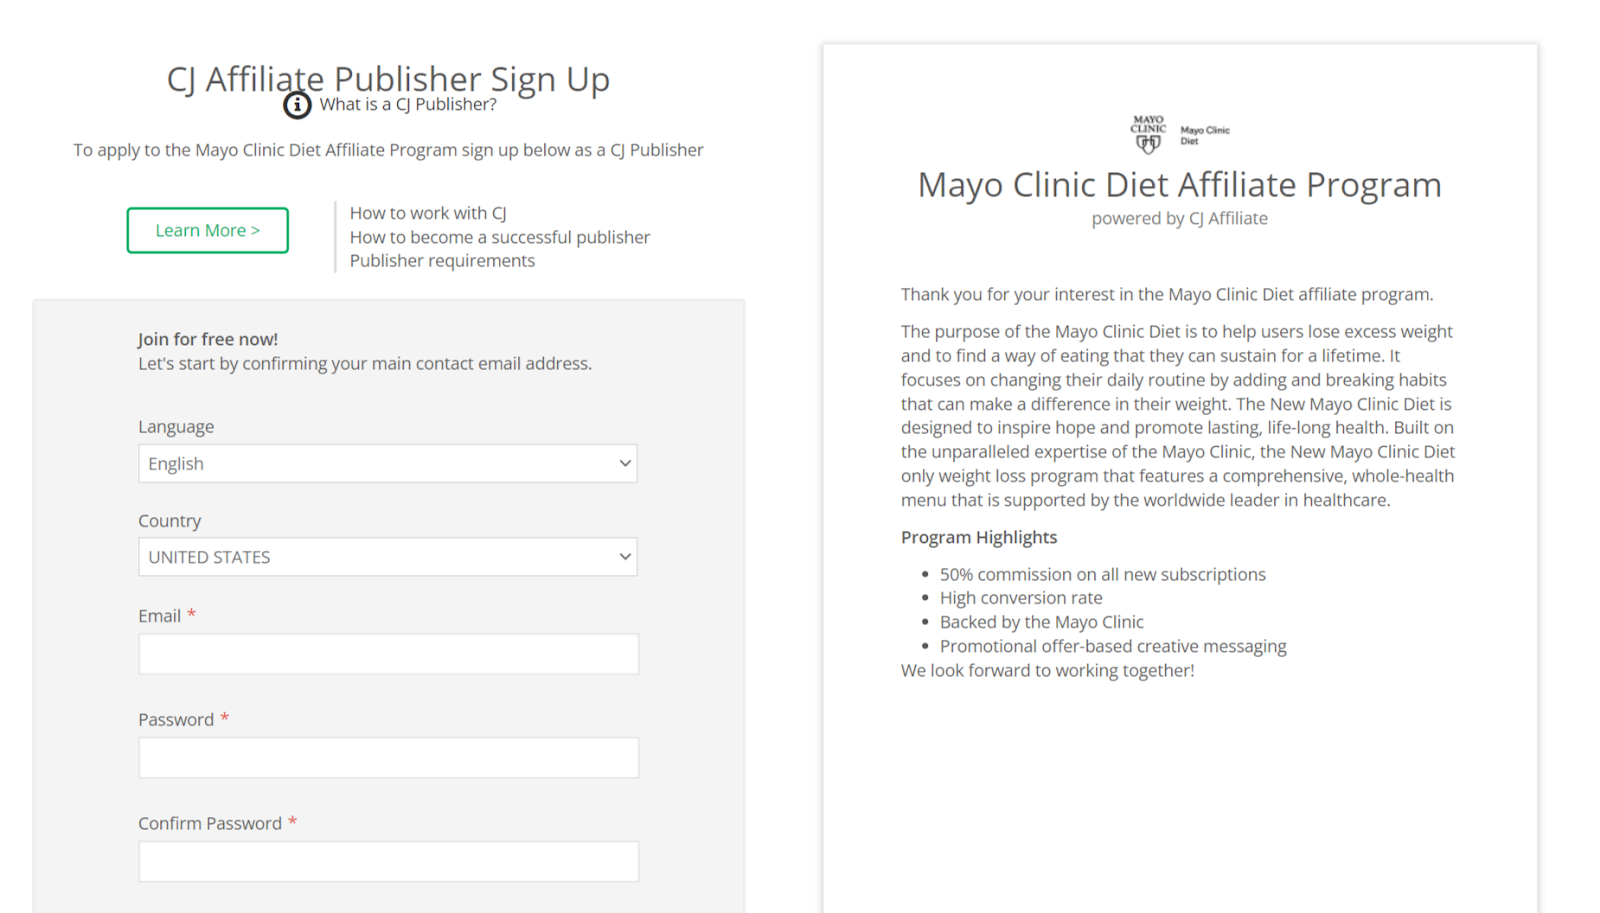 Mayo clinic diet affiliate programs sign up page